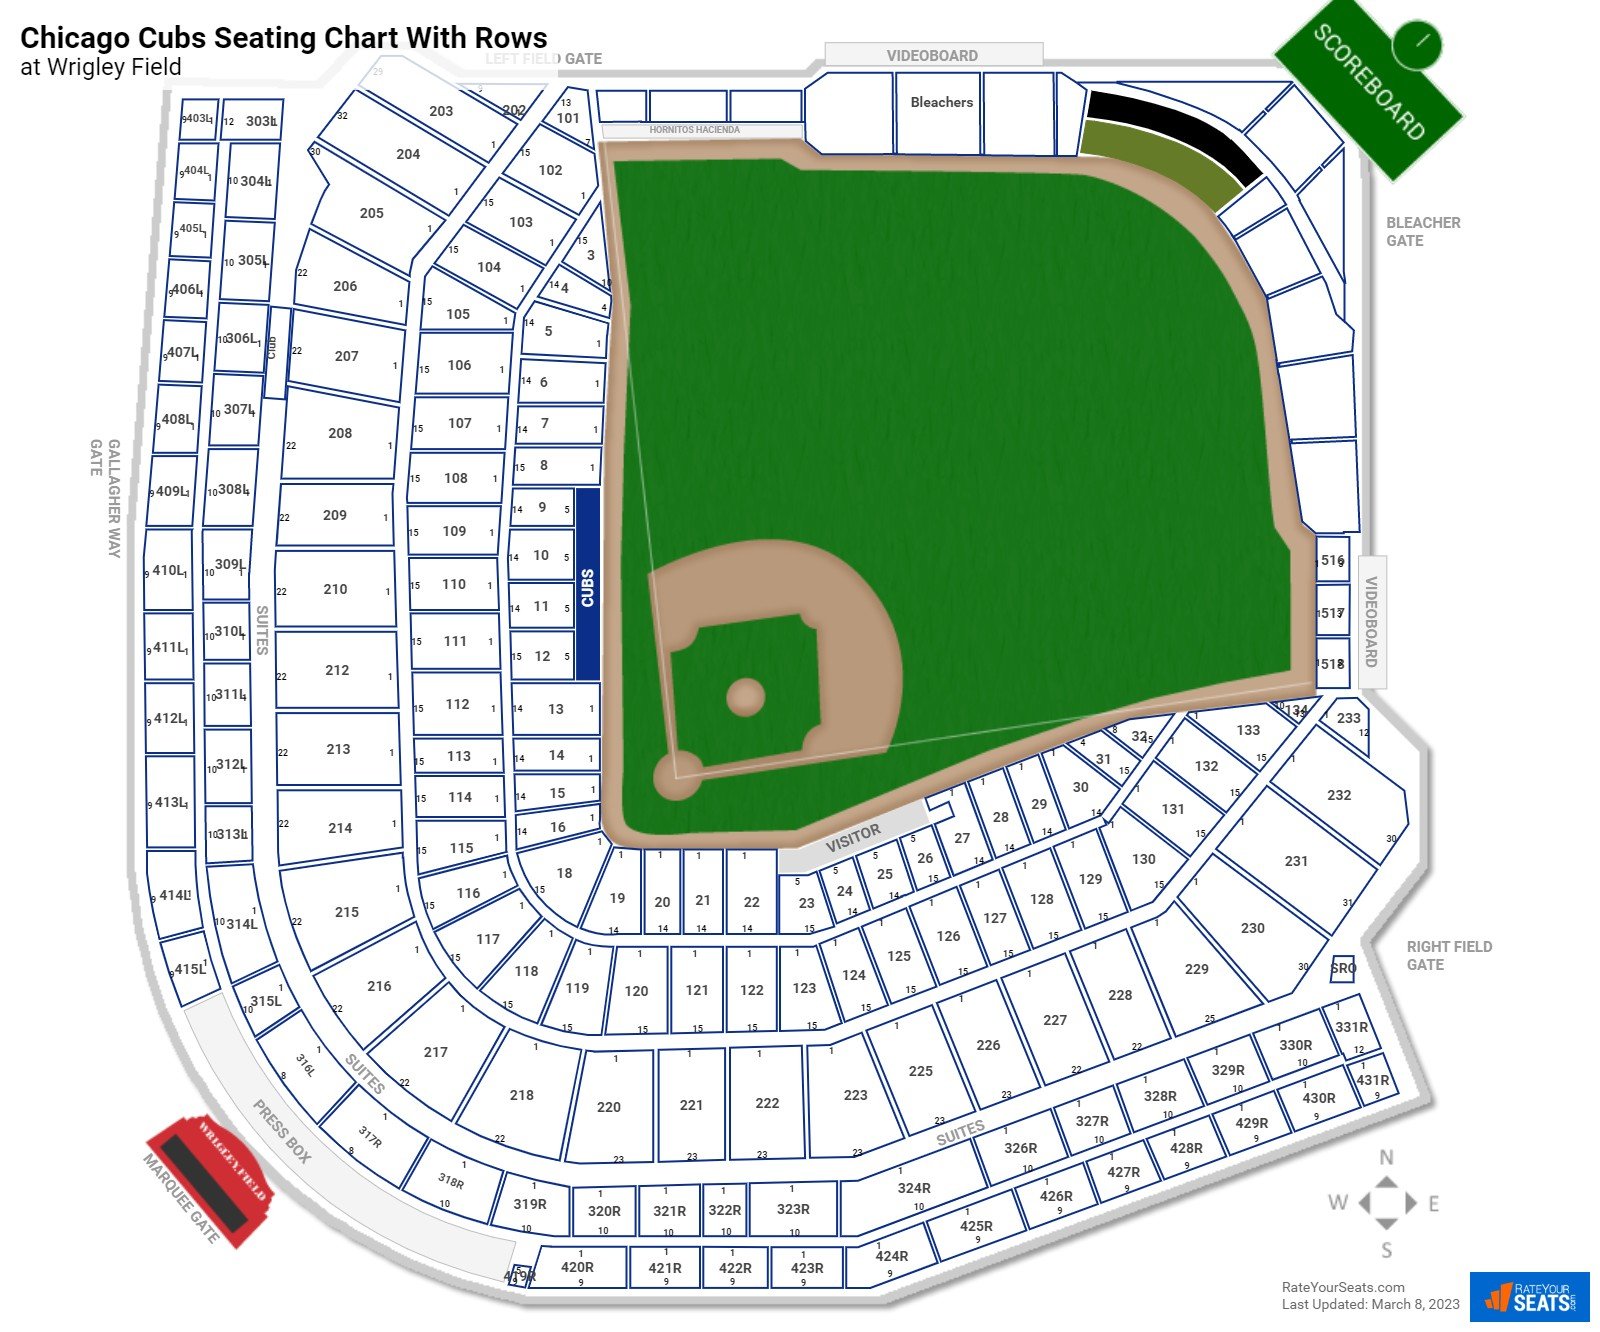 Chicago Cubs Seating Chart 